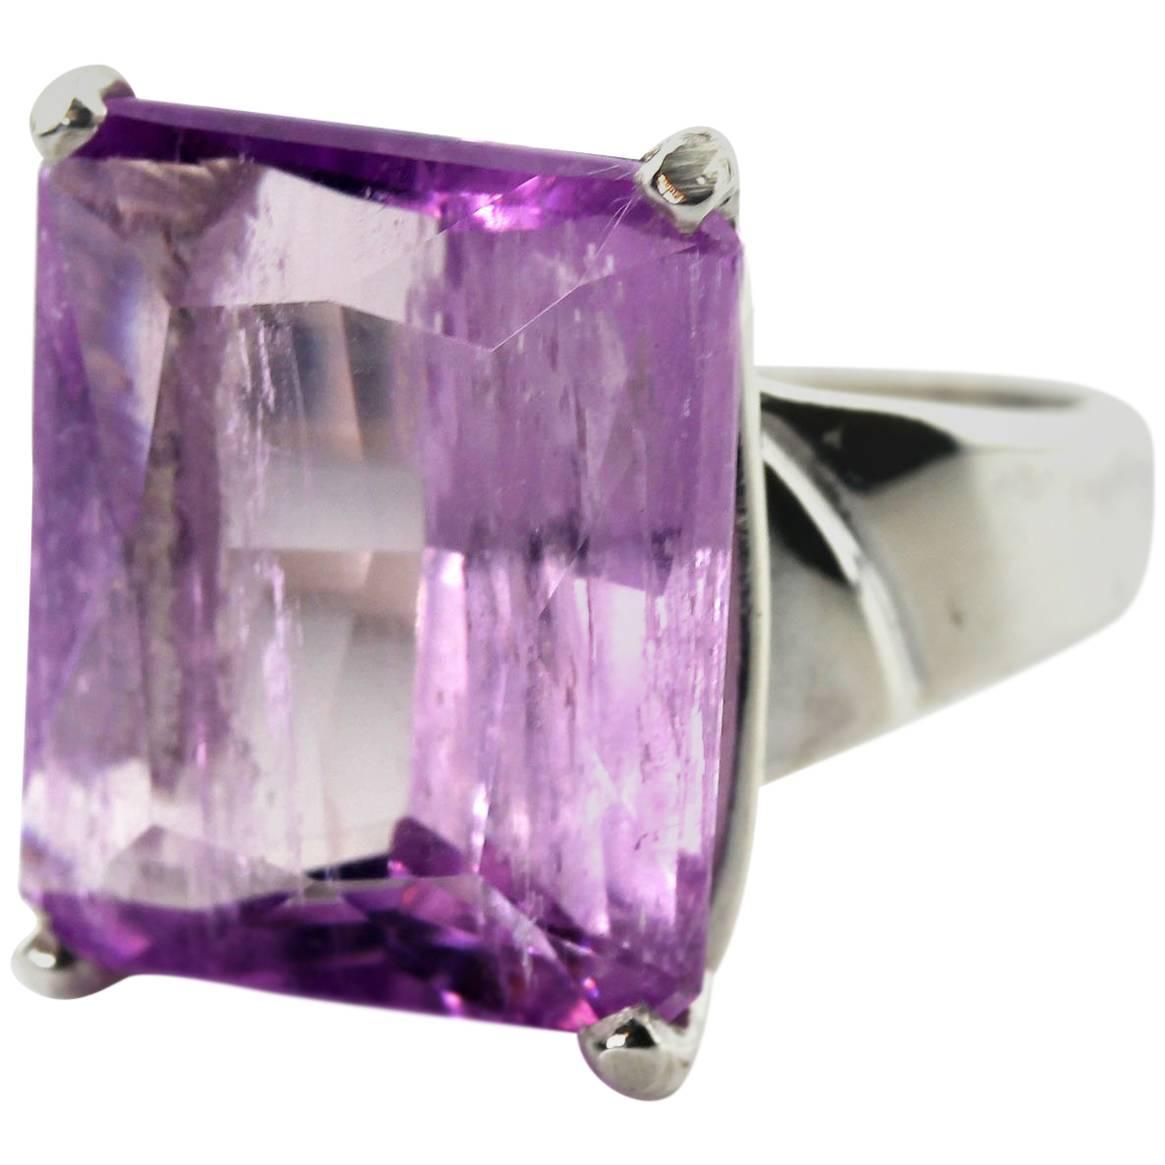 Splendid pink glittering translucent 15.98 Carat unique natural Kunzite from the mountains near Ouro Preto in Brazil.  The gemstone measures 14.4 mm x 17 mm and is set in a handmade Sterling Silver ring size 7 (sizable for free).  